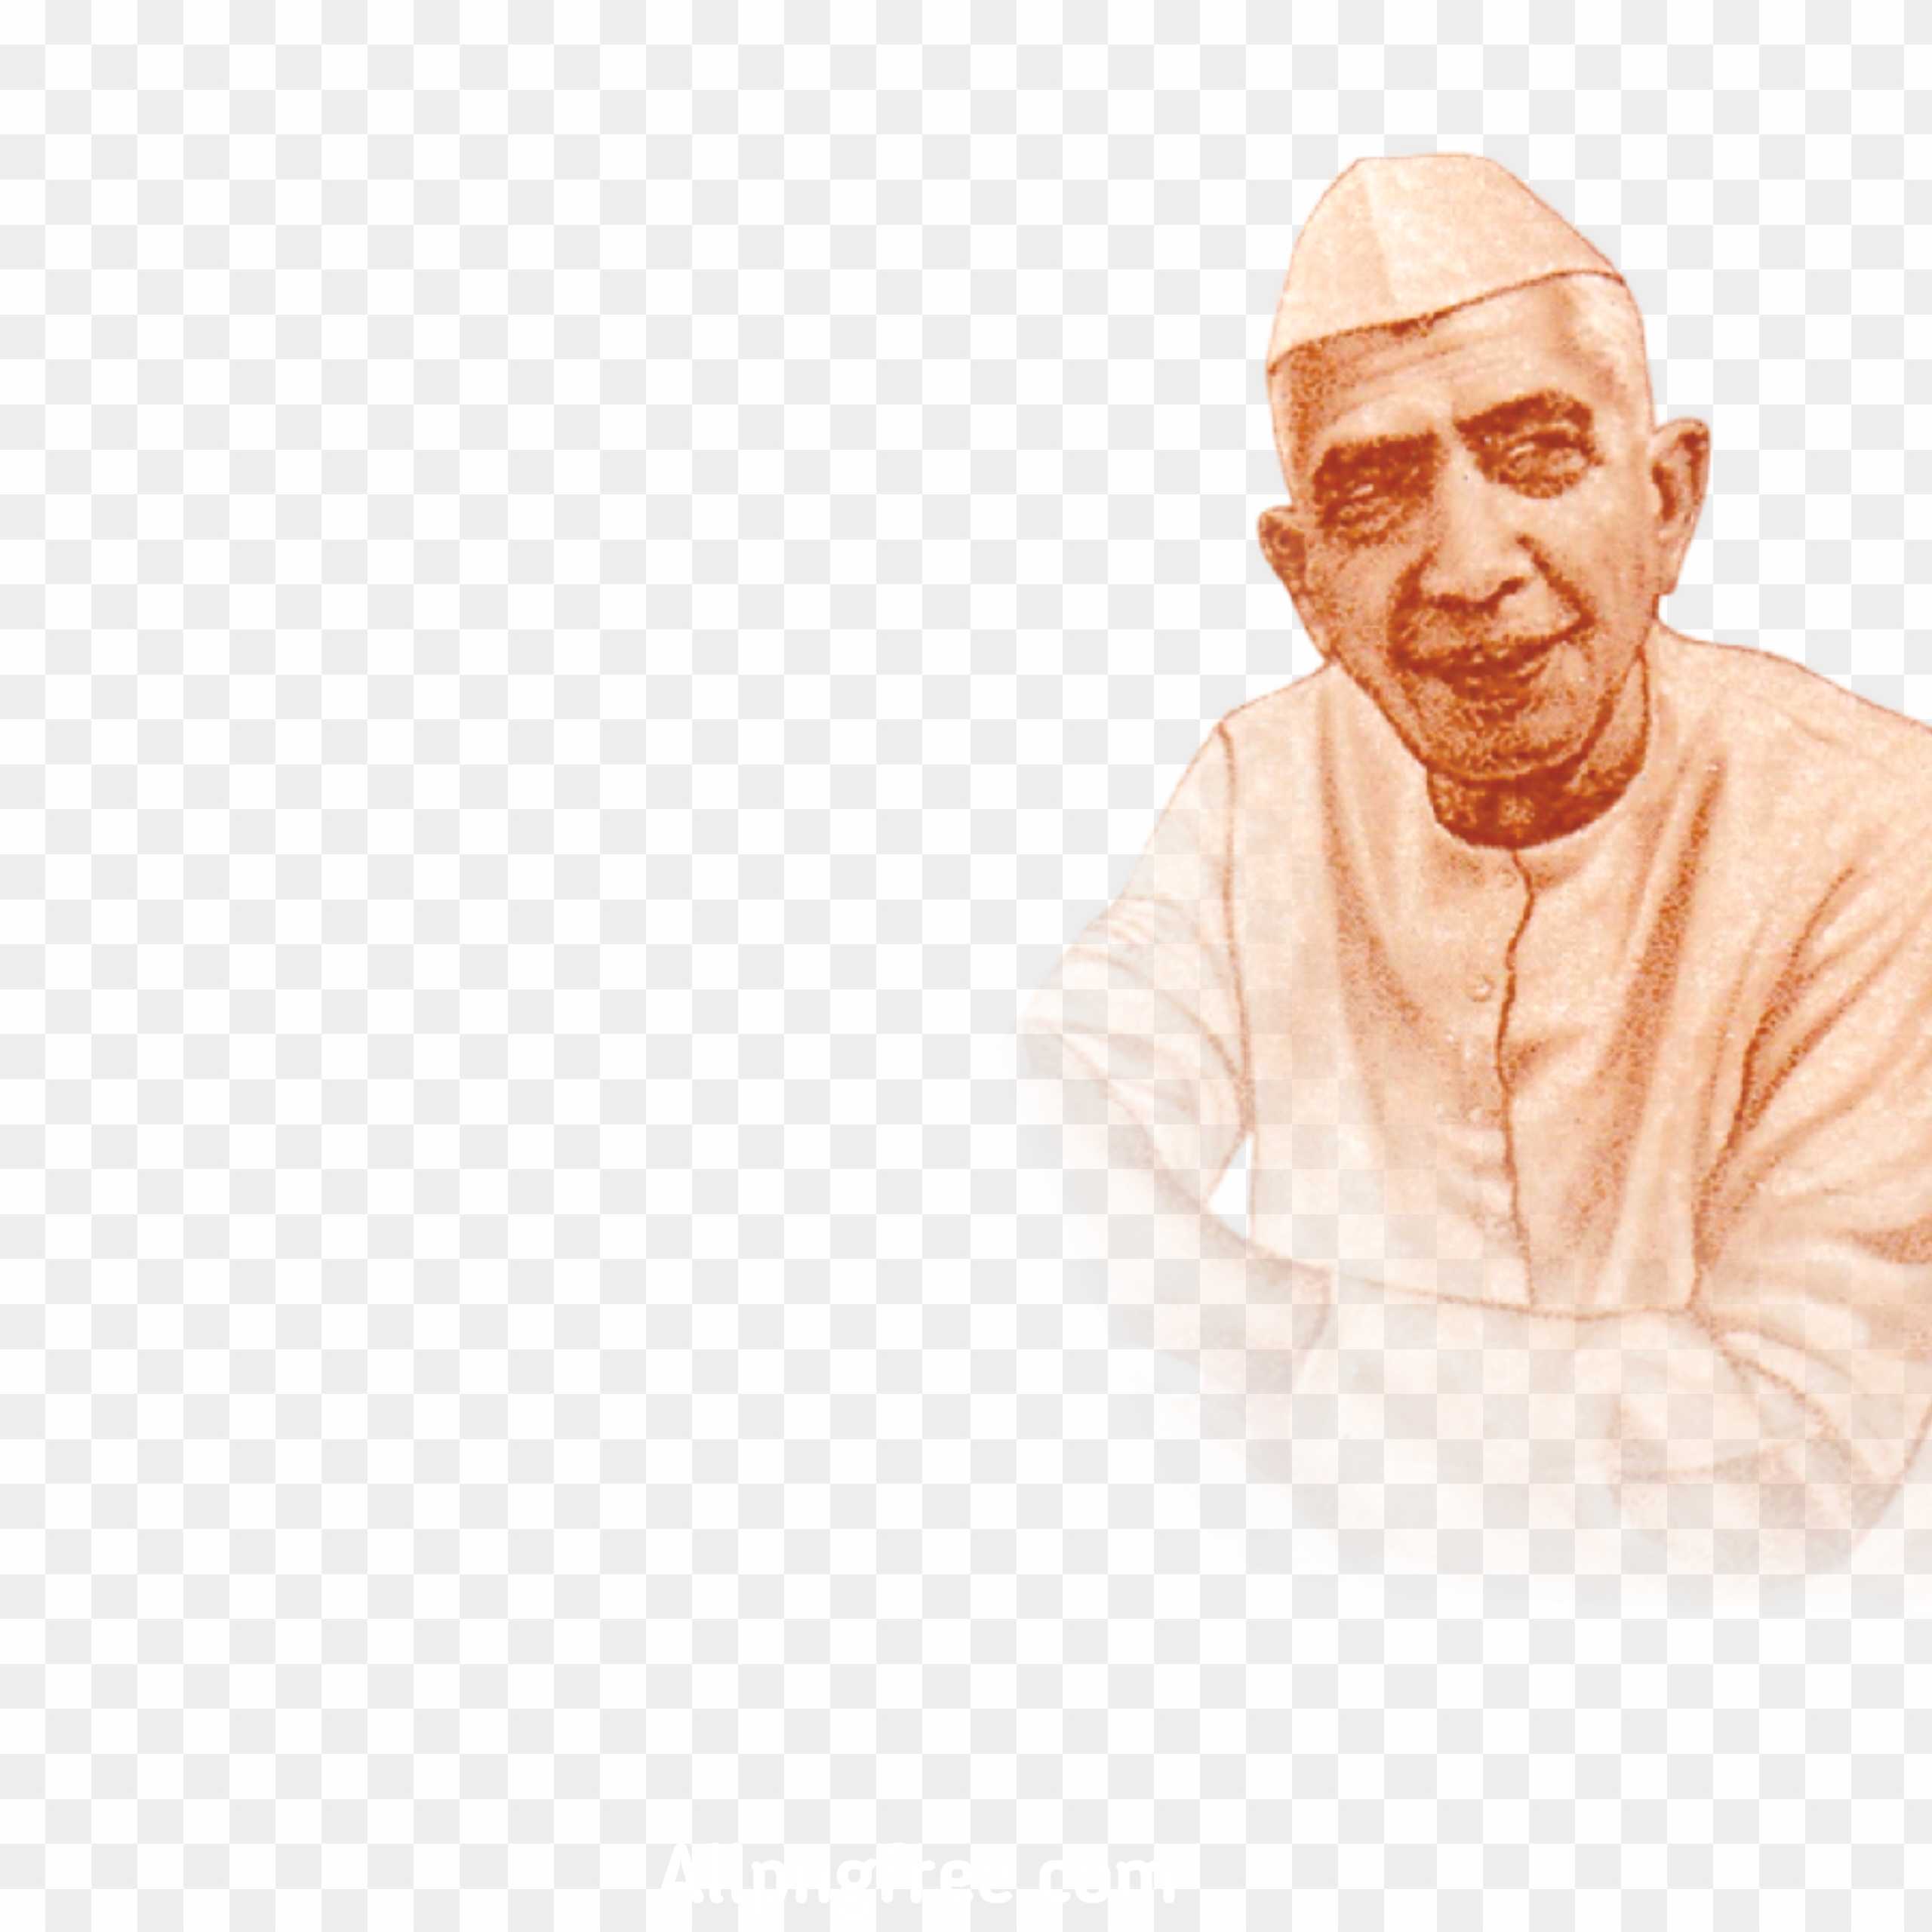 Chaudhary Charan Singh farmers day png download 